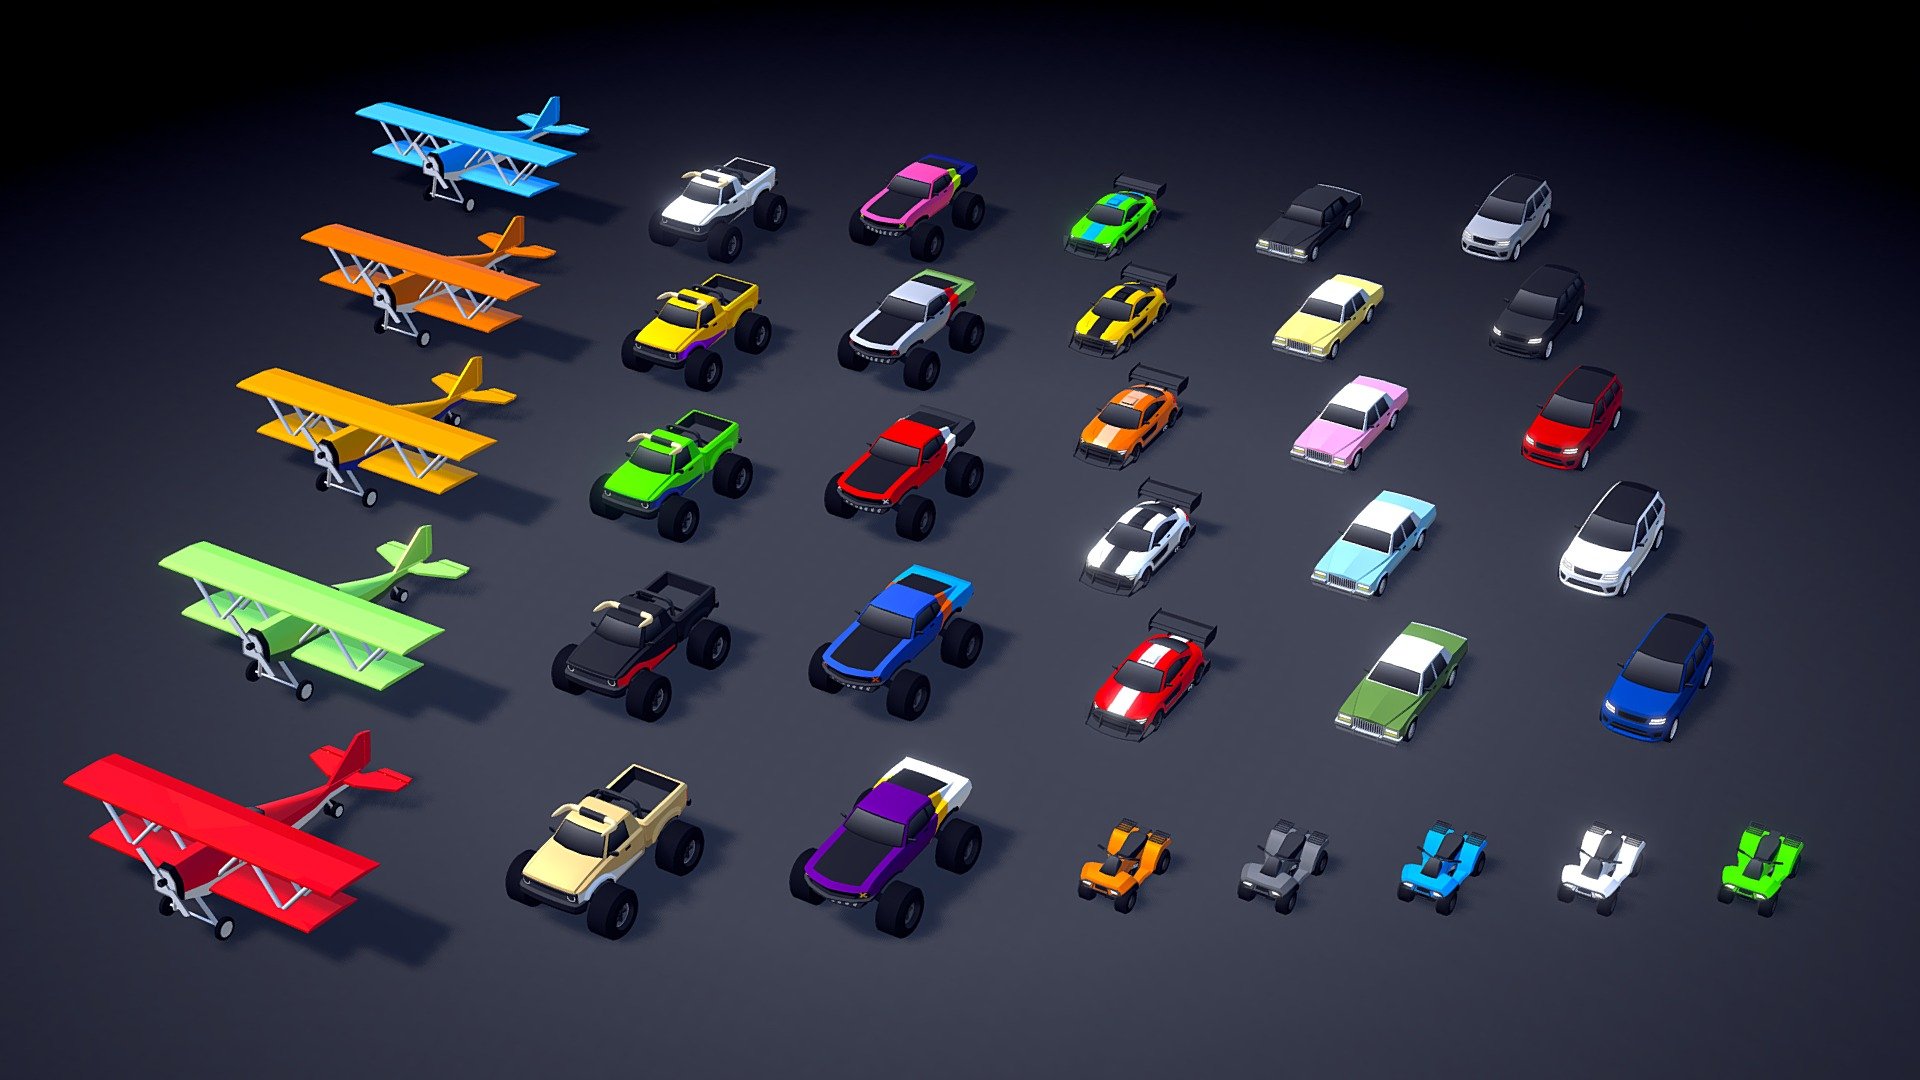 This is the (free) March update (2022) of my asset called ARCADE: Ultimate Vehicles Pack. It will be launched during the first week of March, 2022.

This asset is available for Unity3D (in the Unity Asset Store) and Sketchfab (FBX + UNITY Files included).

The update includes 7 new vehicles (racing cars, monster trucks, and more).

Best regards, Mena 3d model